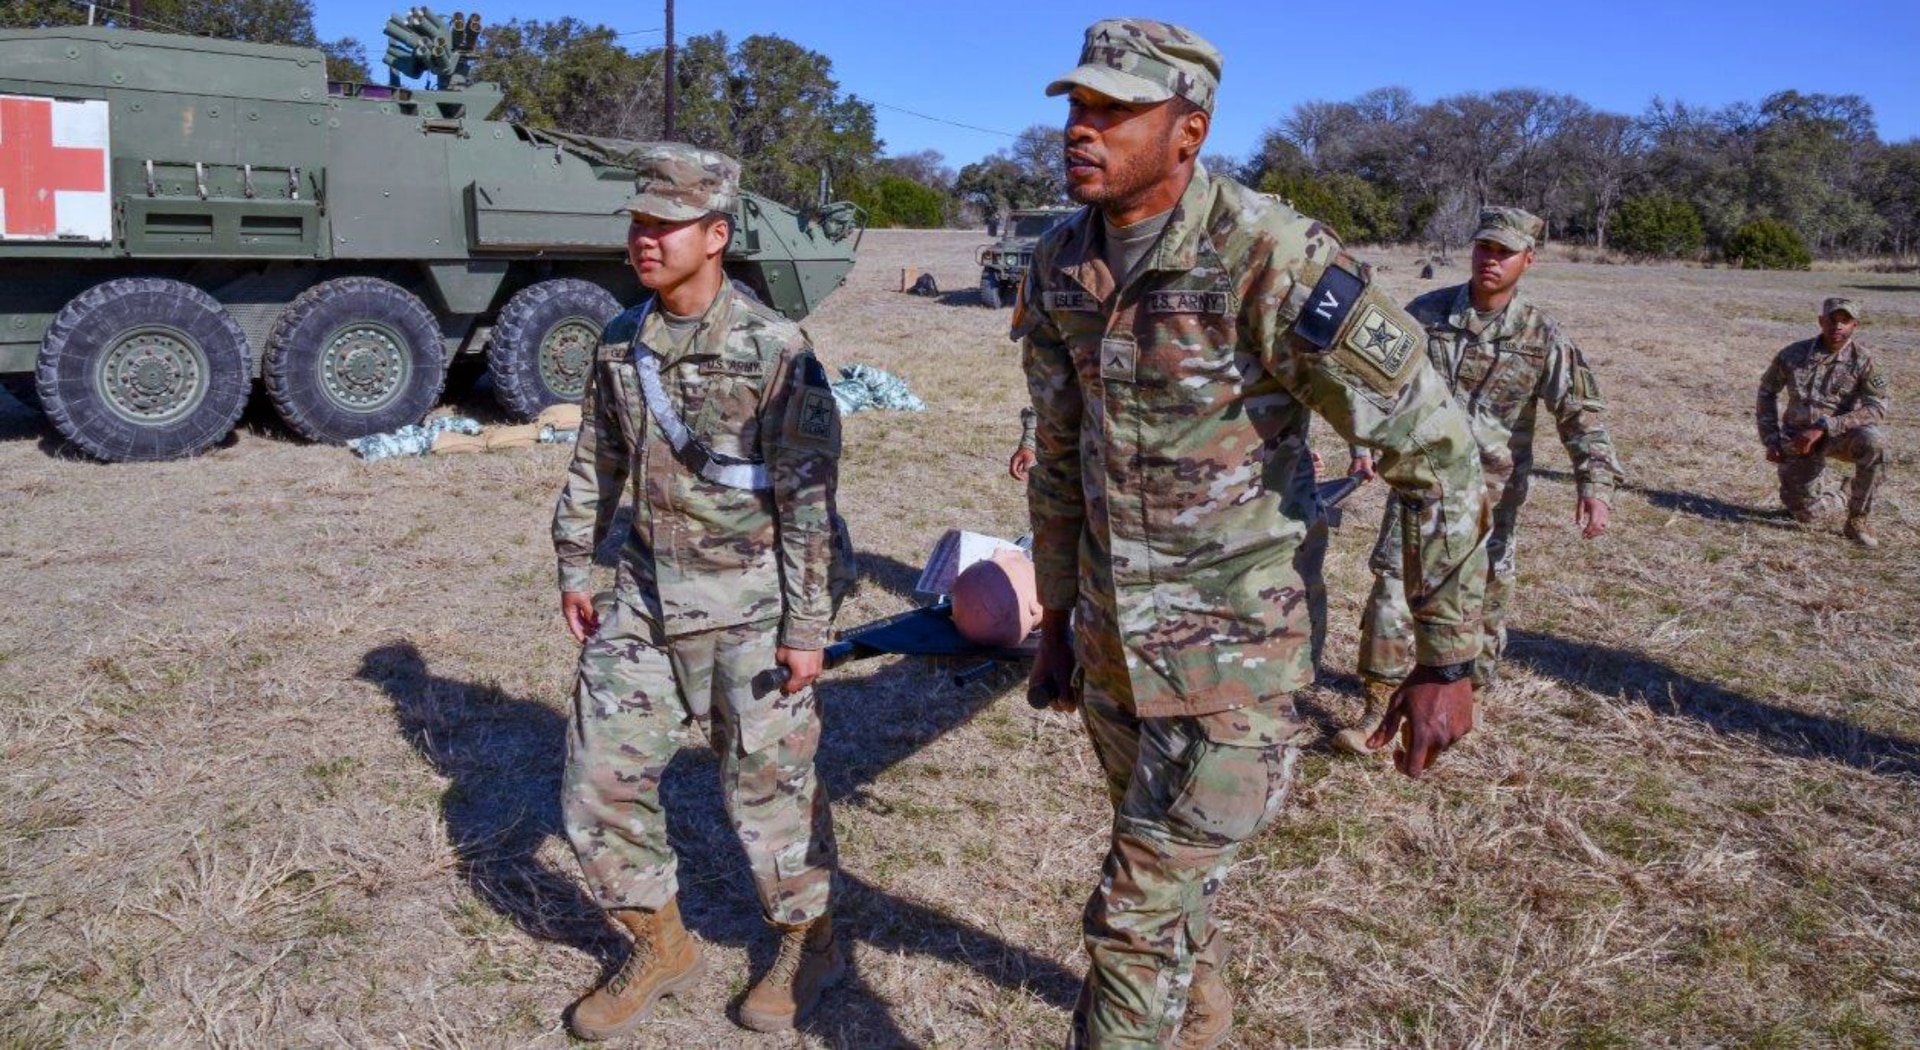 MEDCoE Expert Field Medical Badge test event takes place at JBSA-Camp Bullis